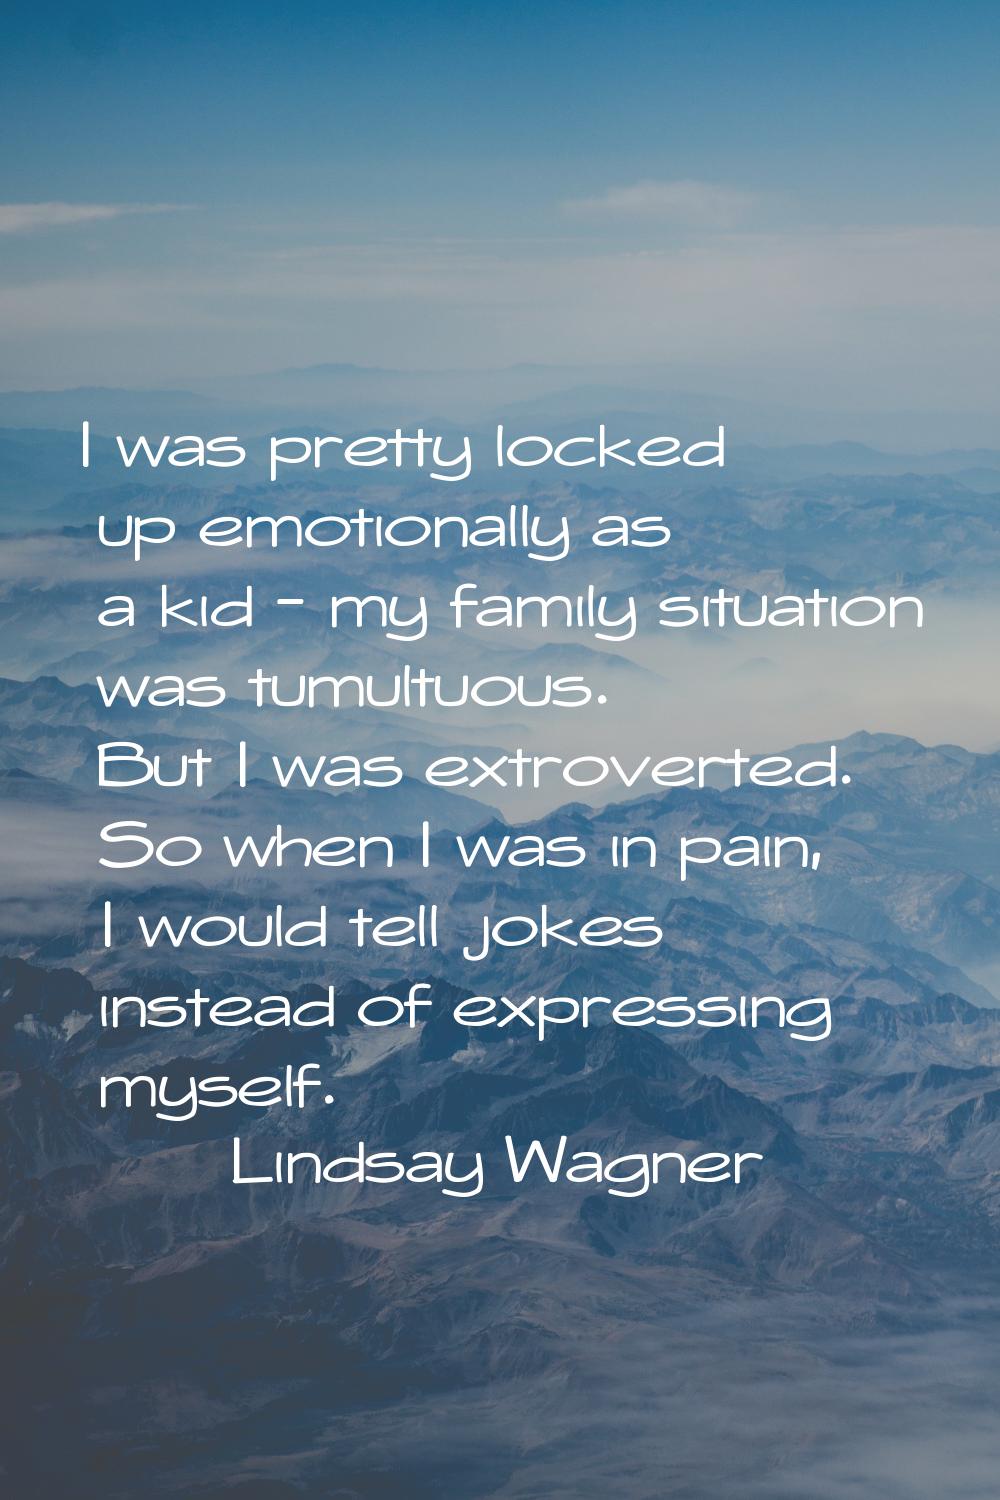 I was pretty locked up emotionally as a kid - my family situation was tumultuous. But I was extrove